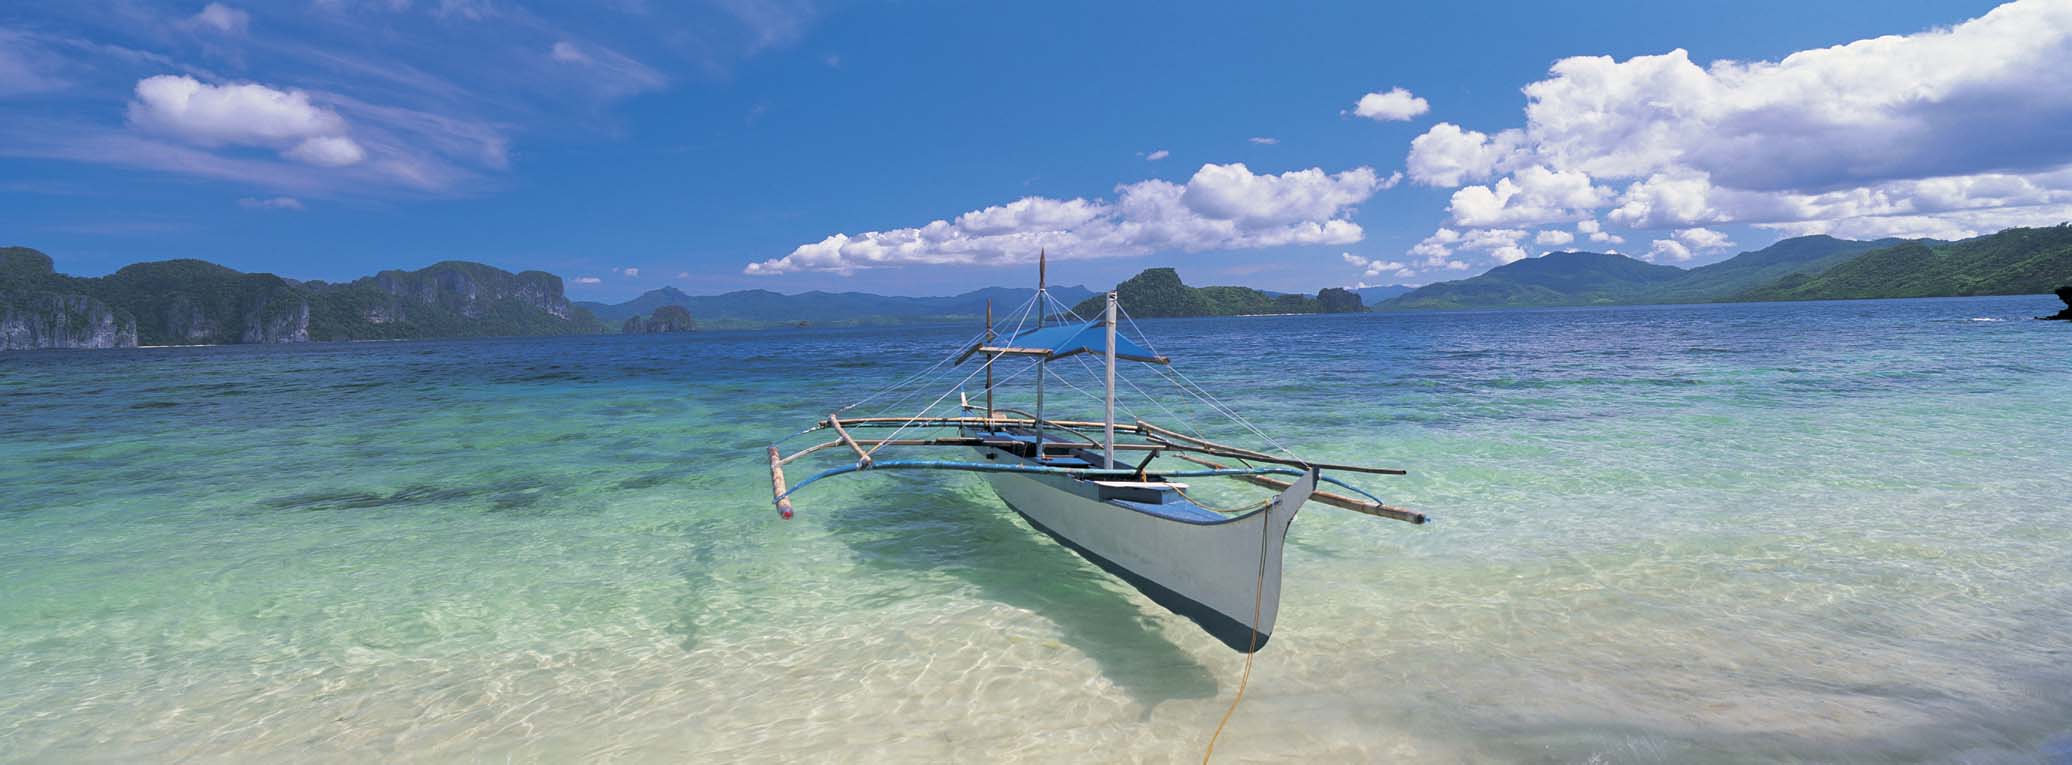 Download this Beach Boats Palawan... picture